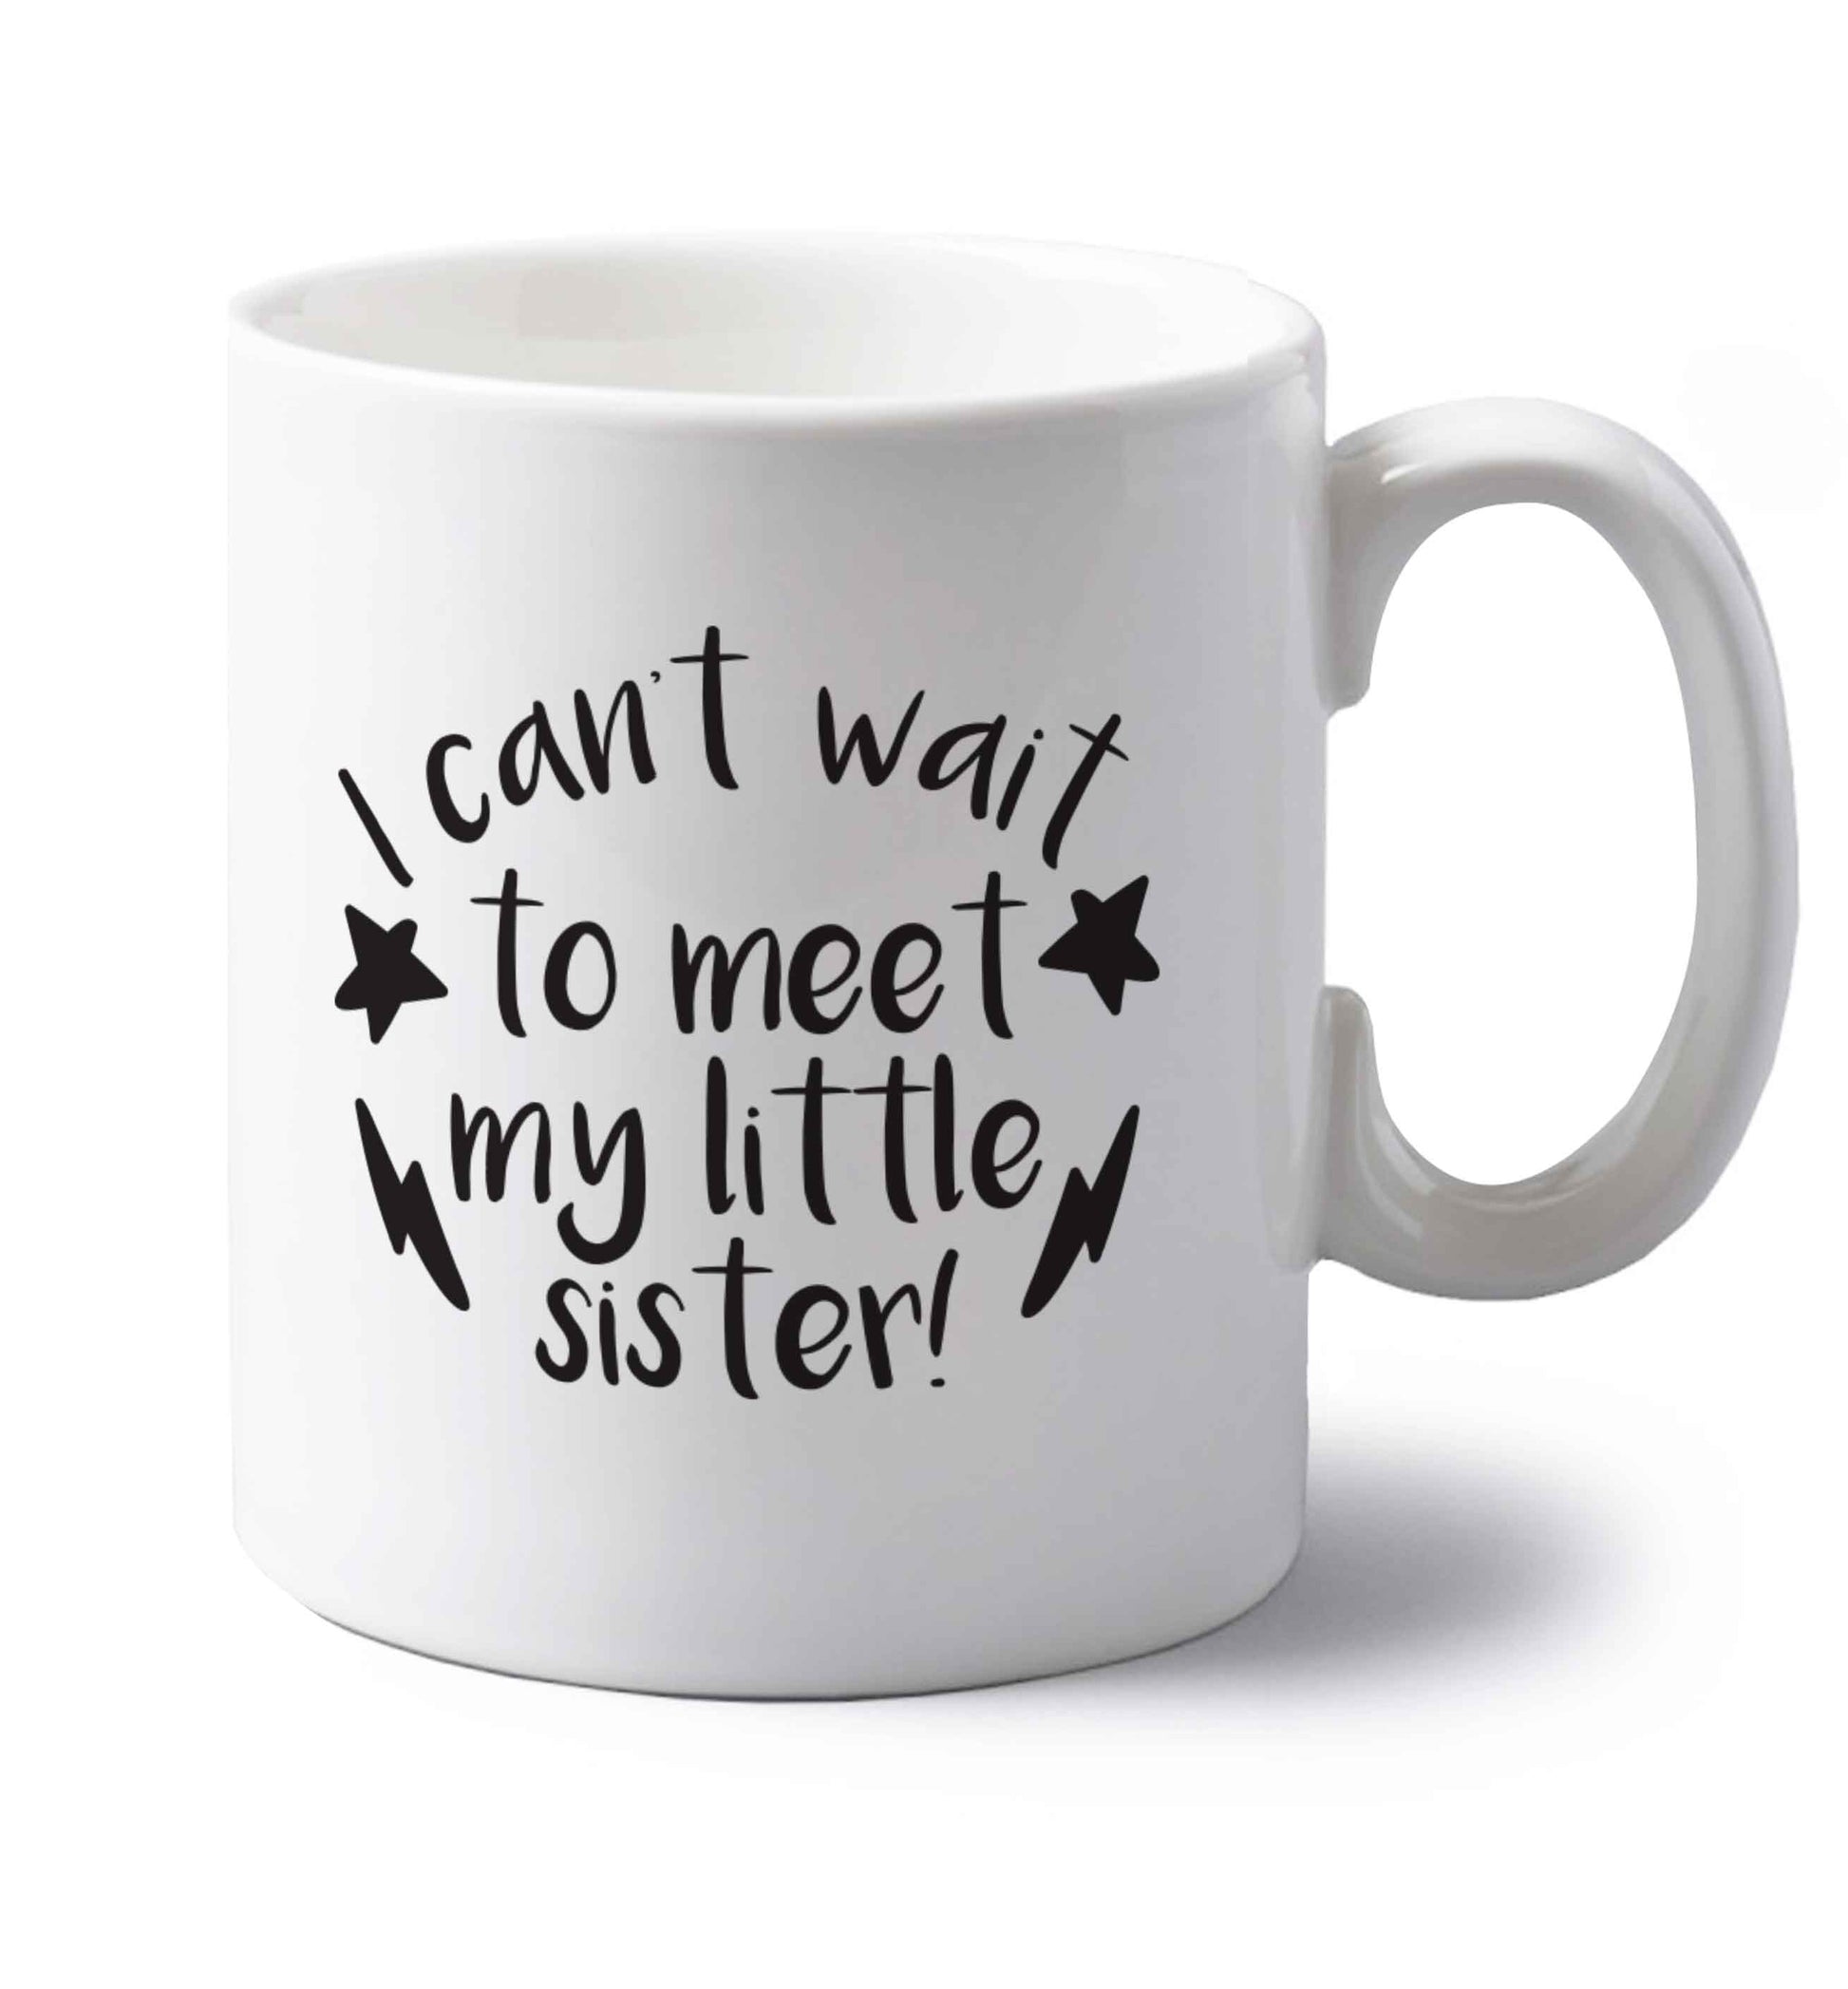 Something special growing inside it's my little sister I can't wait to say hi! left handed white ceramic mug 